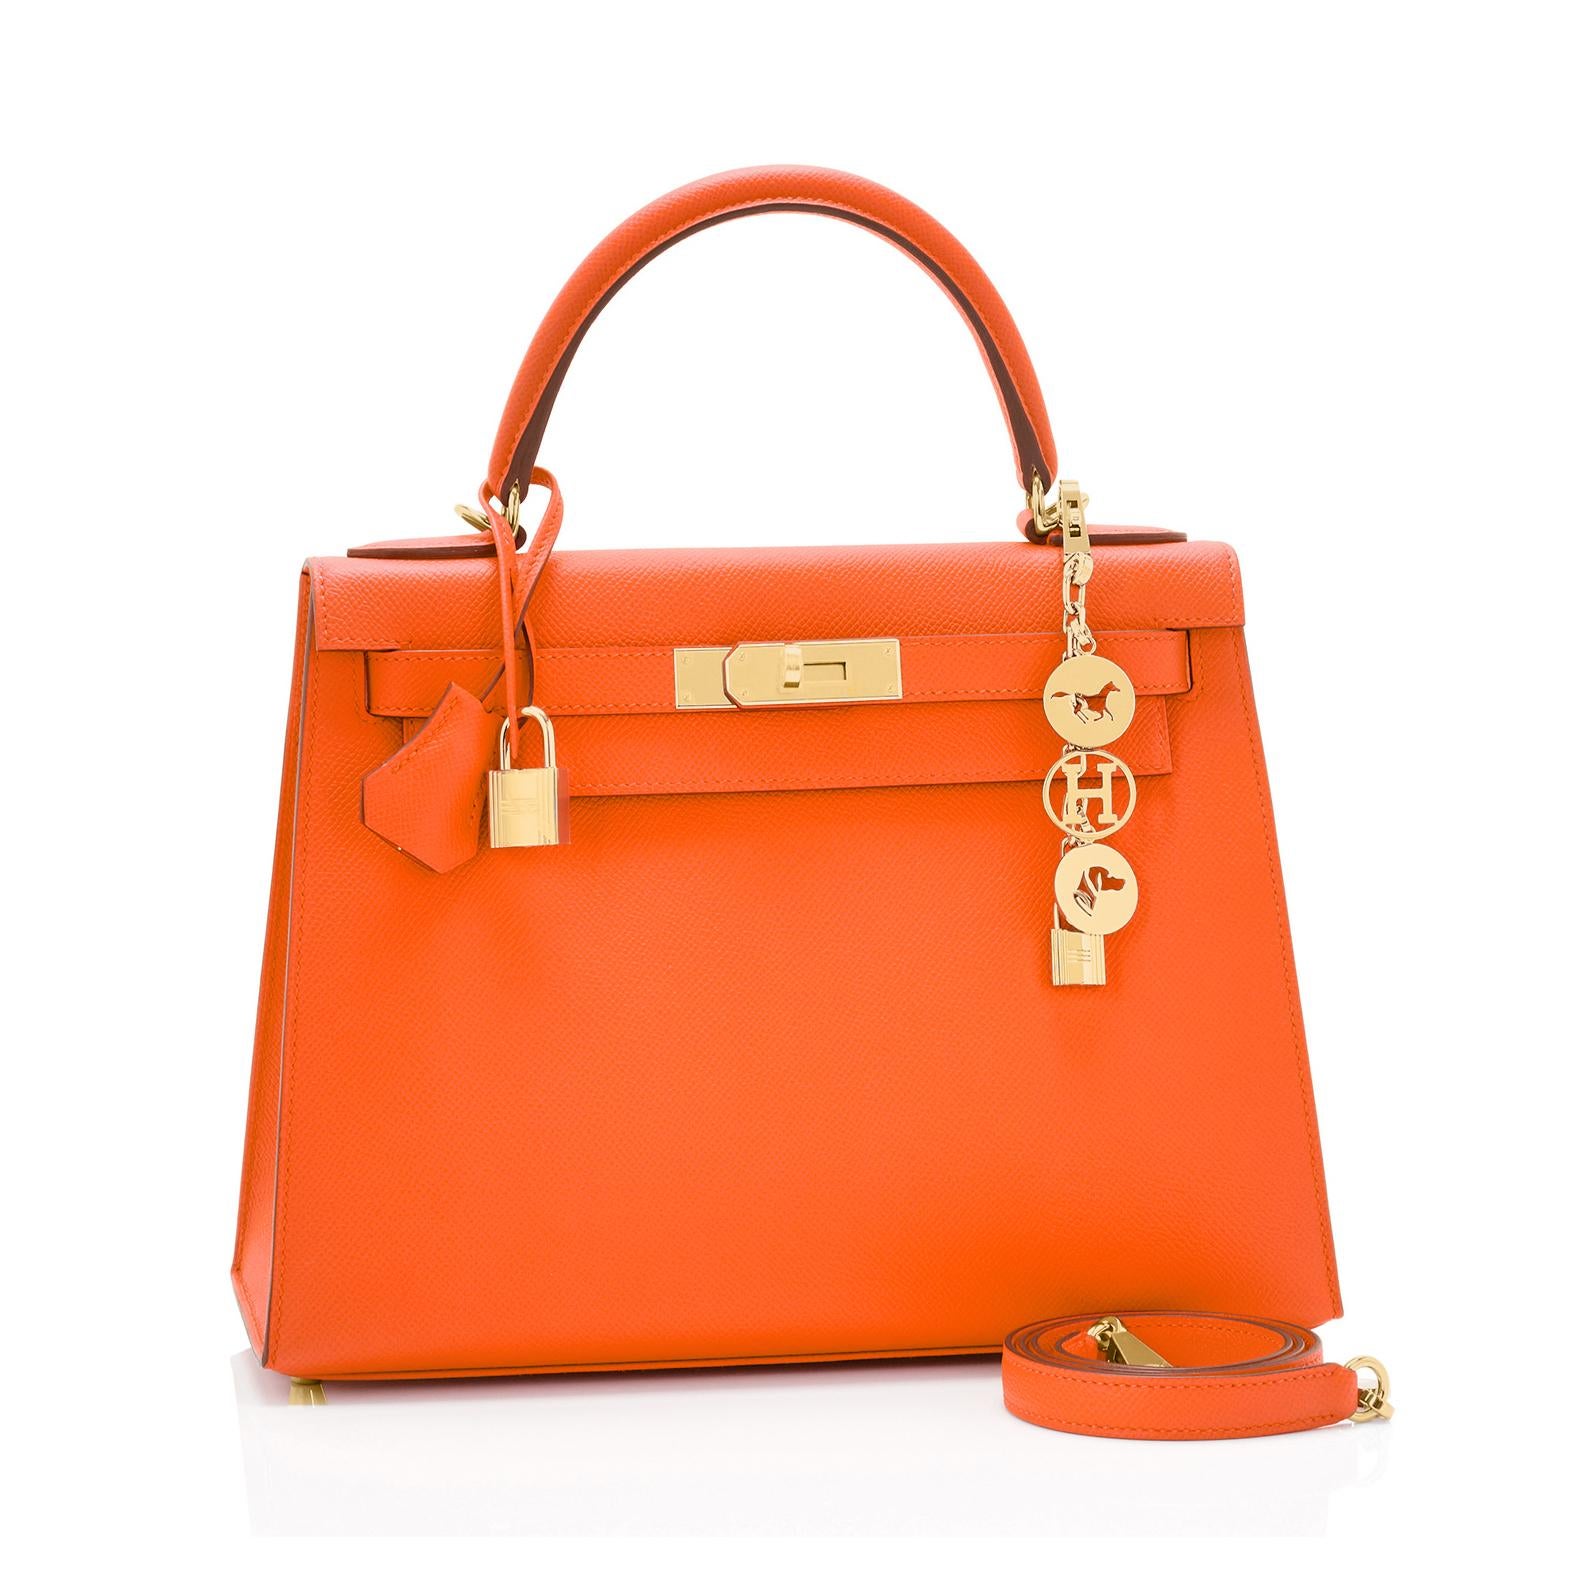 Hermes Kelly 28cm Feu Orange Epsom Gold Sellier Shoulder Bag RARE Y Stamp, 2020
Rare Feu Orange Kelly with gold hardware combination!
Just purchased from Hermes store. Bag bears new 2020 interior Y Stamp.
New or Never Worn. Store Fresh. Pristine